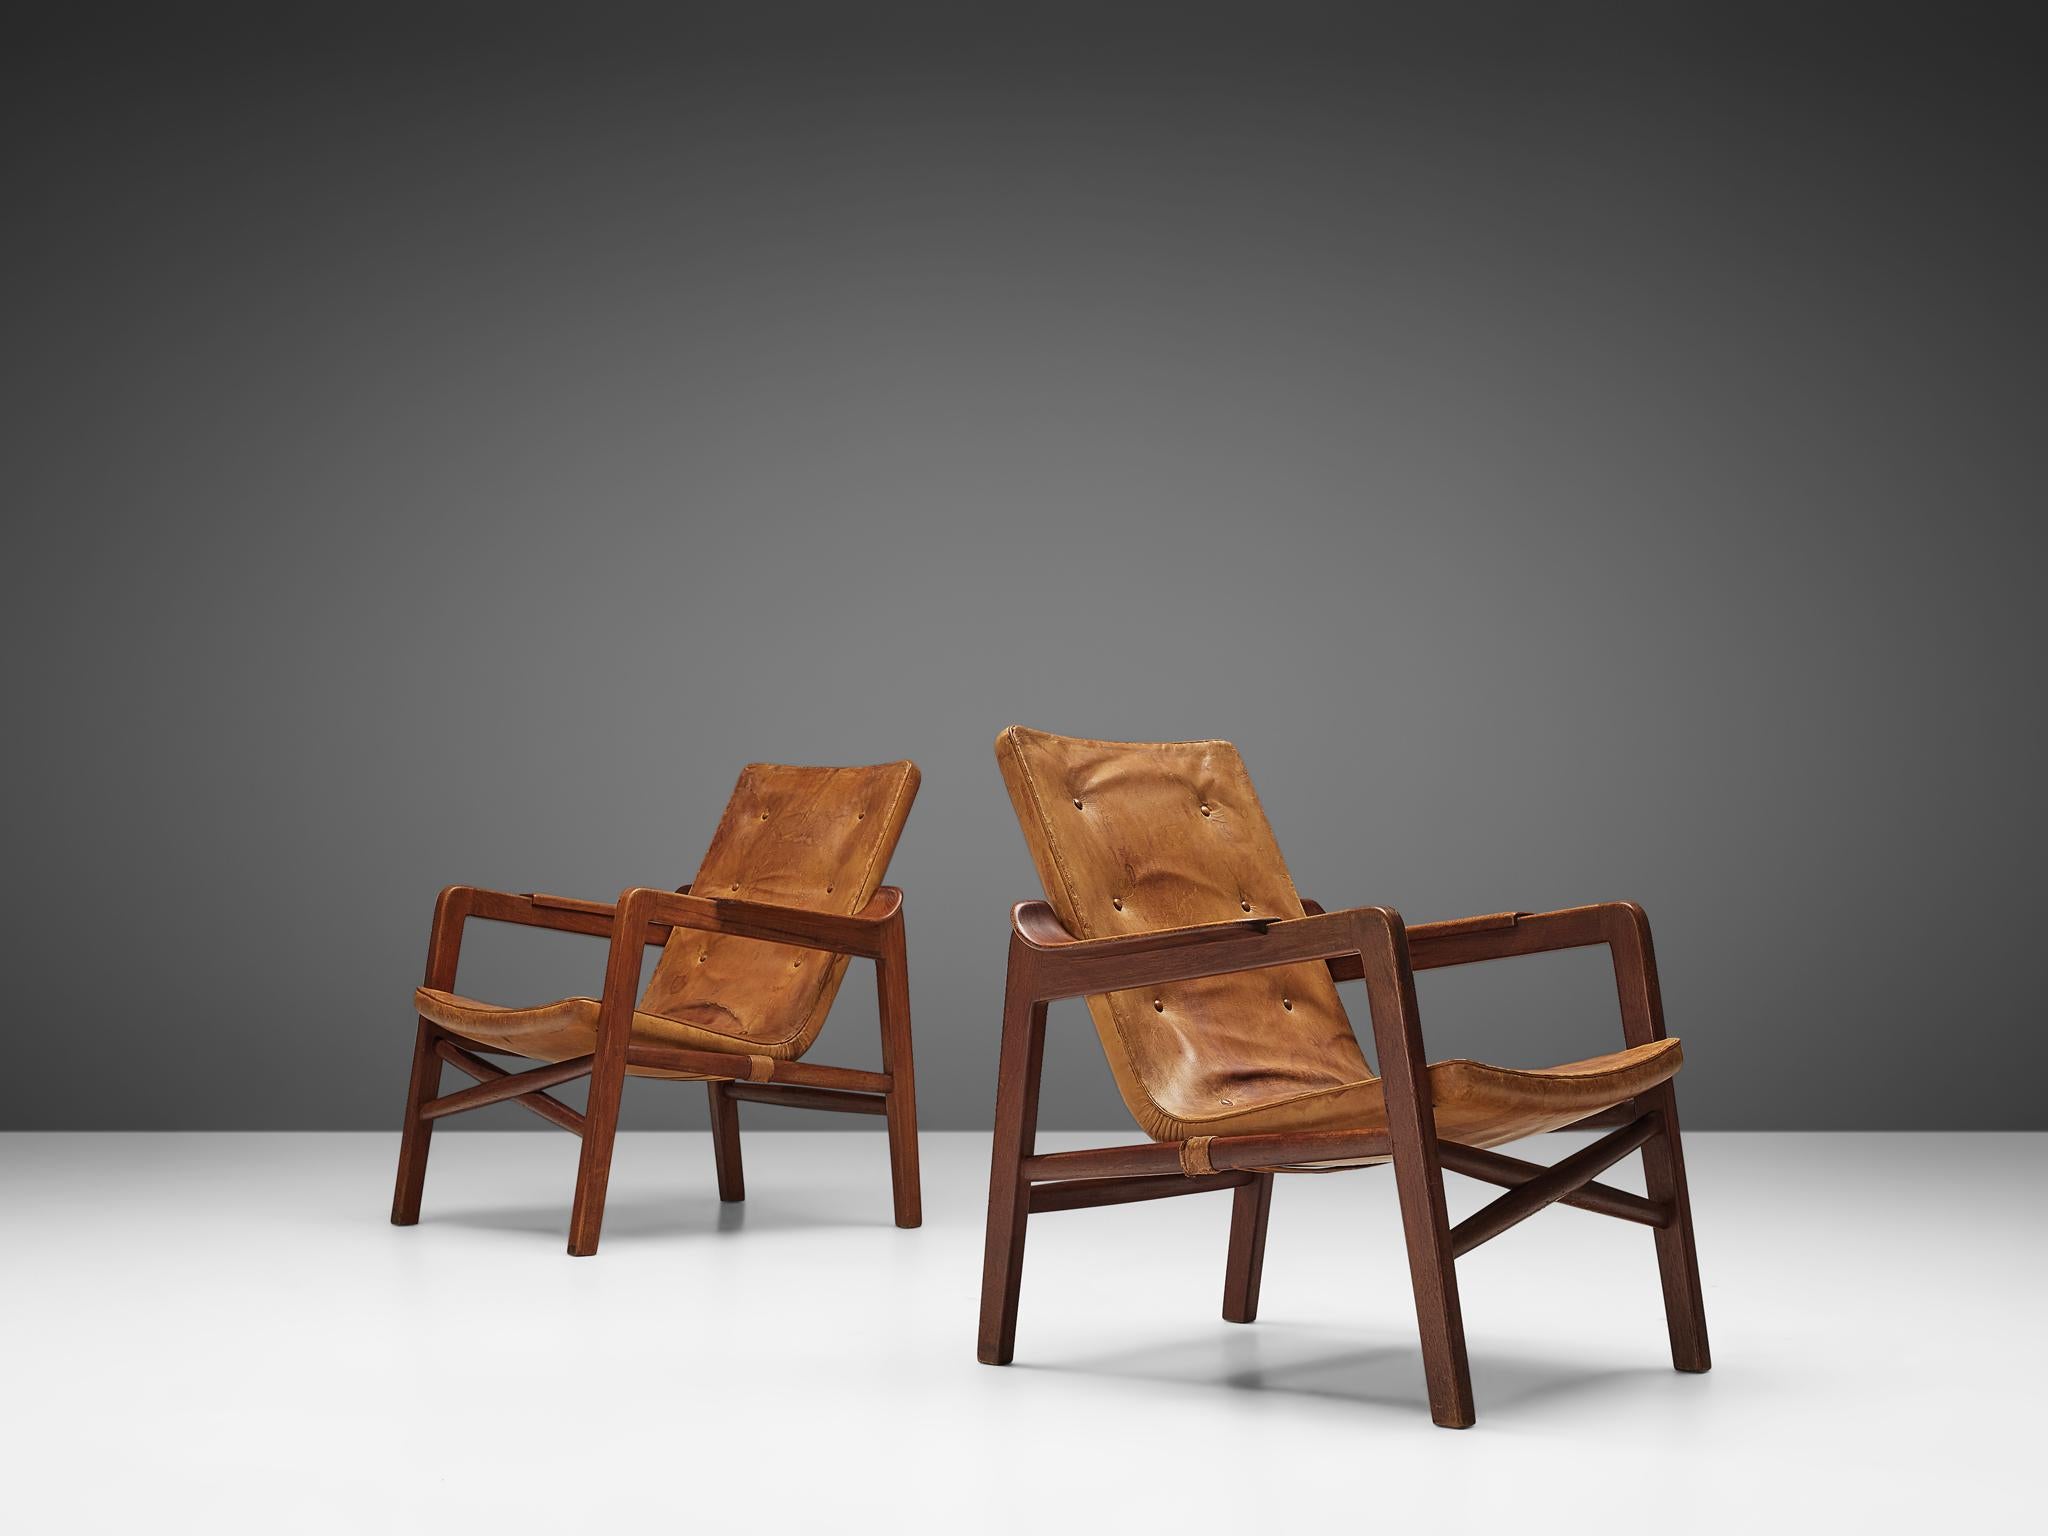 Tove & Edvard Kindt-Larsen for Gustav Bertelsen, pair of 'Fireplace' chairs, teak, leather, Denmark, 1940

This pair of lounge chairs was specially designed to sit in front of a fireplace. When it was first exhibited, this model was mentioned as a